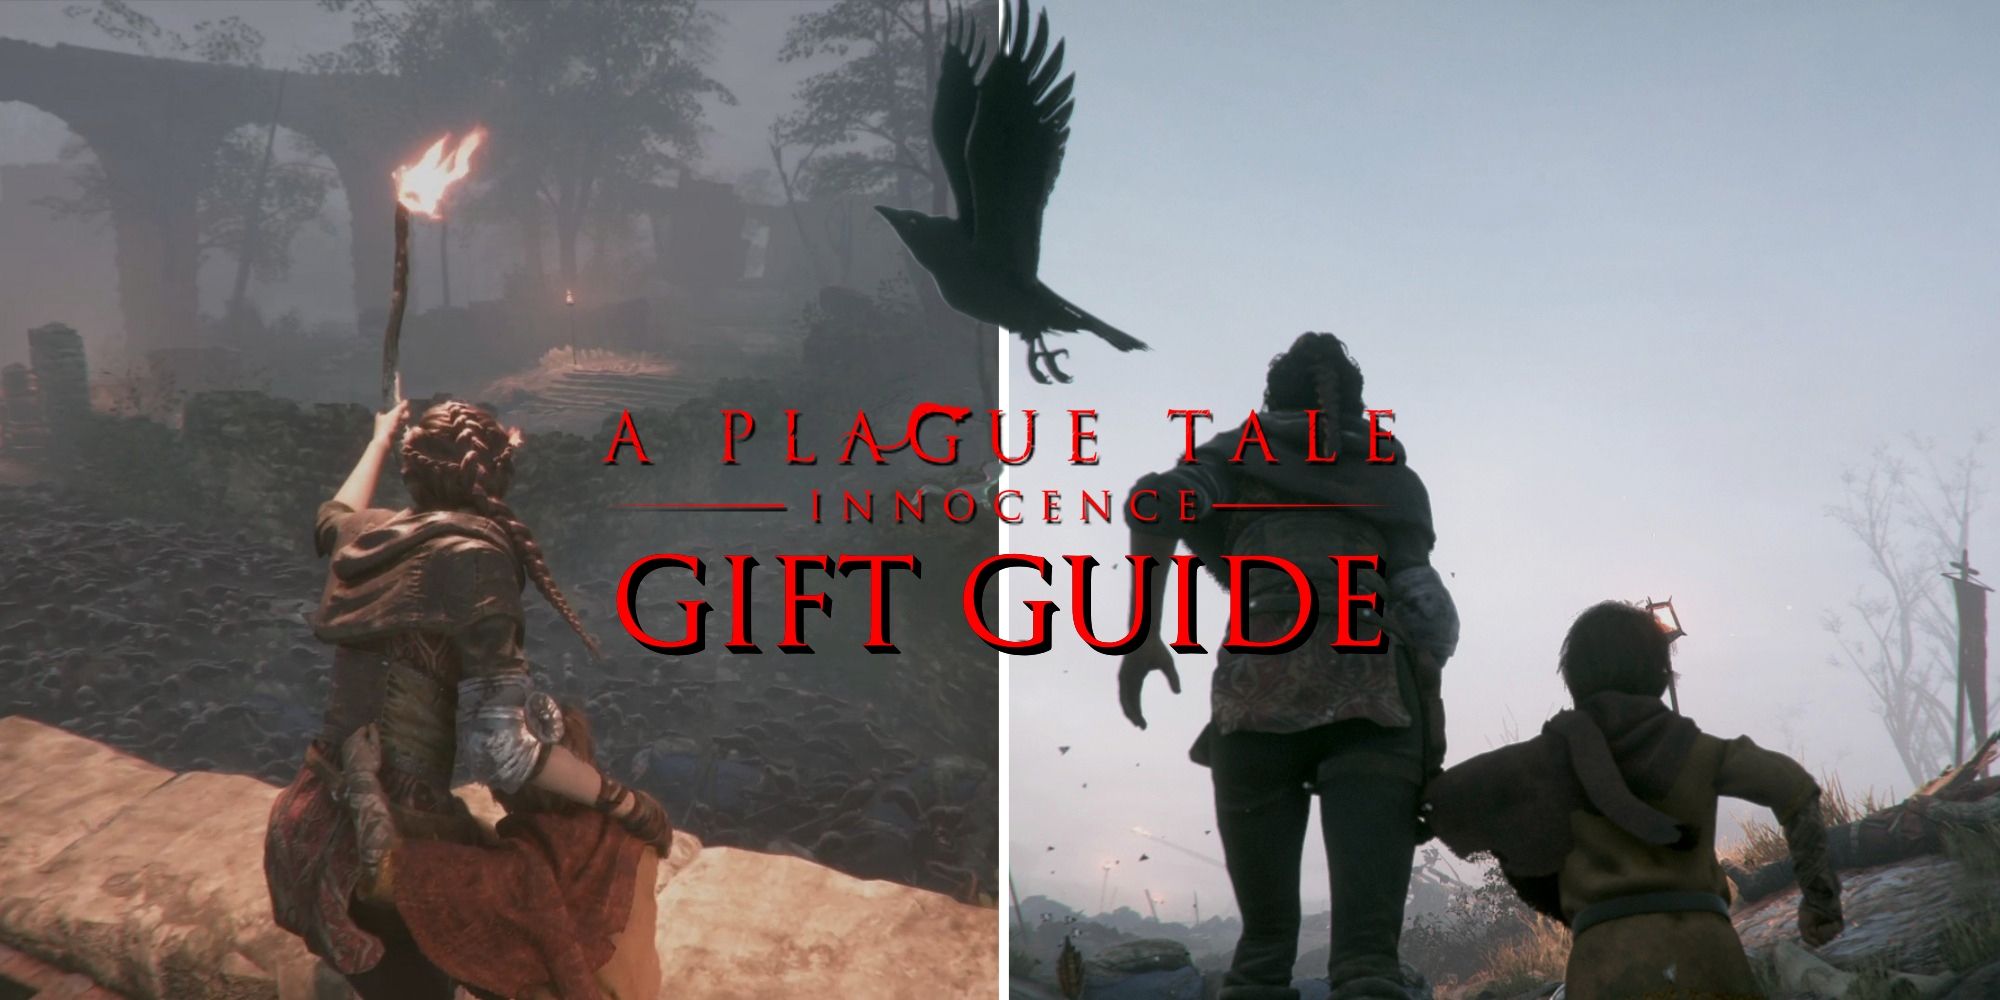 Guide for A Plague Tale: Innocence - Chapter 8 - Our Home